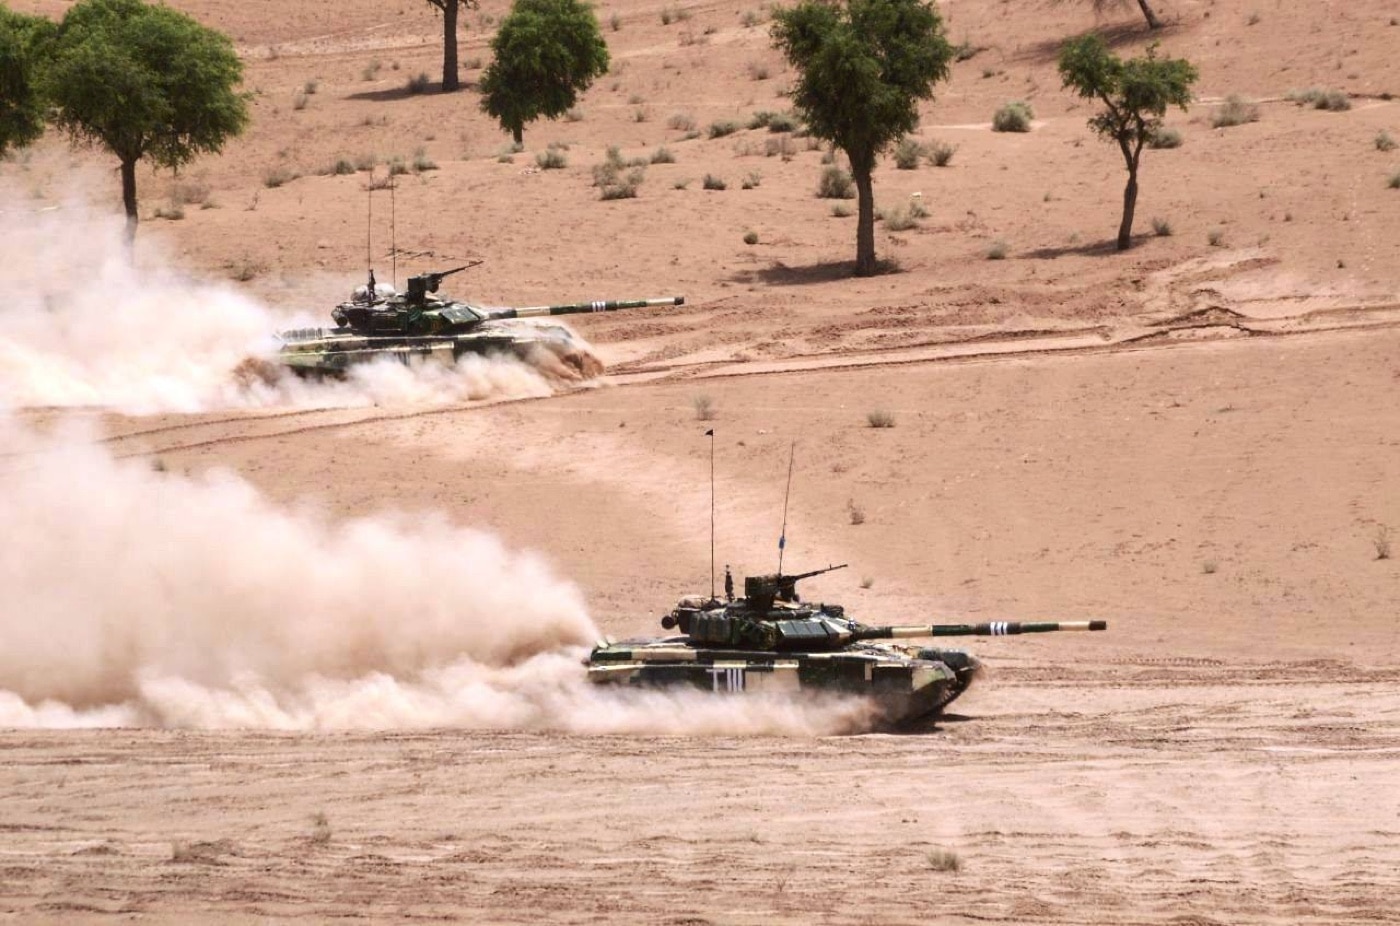 t-90s tanks in india army on training maneuvers in 2018